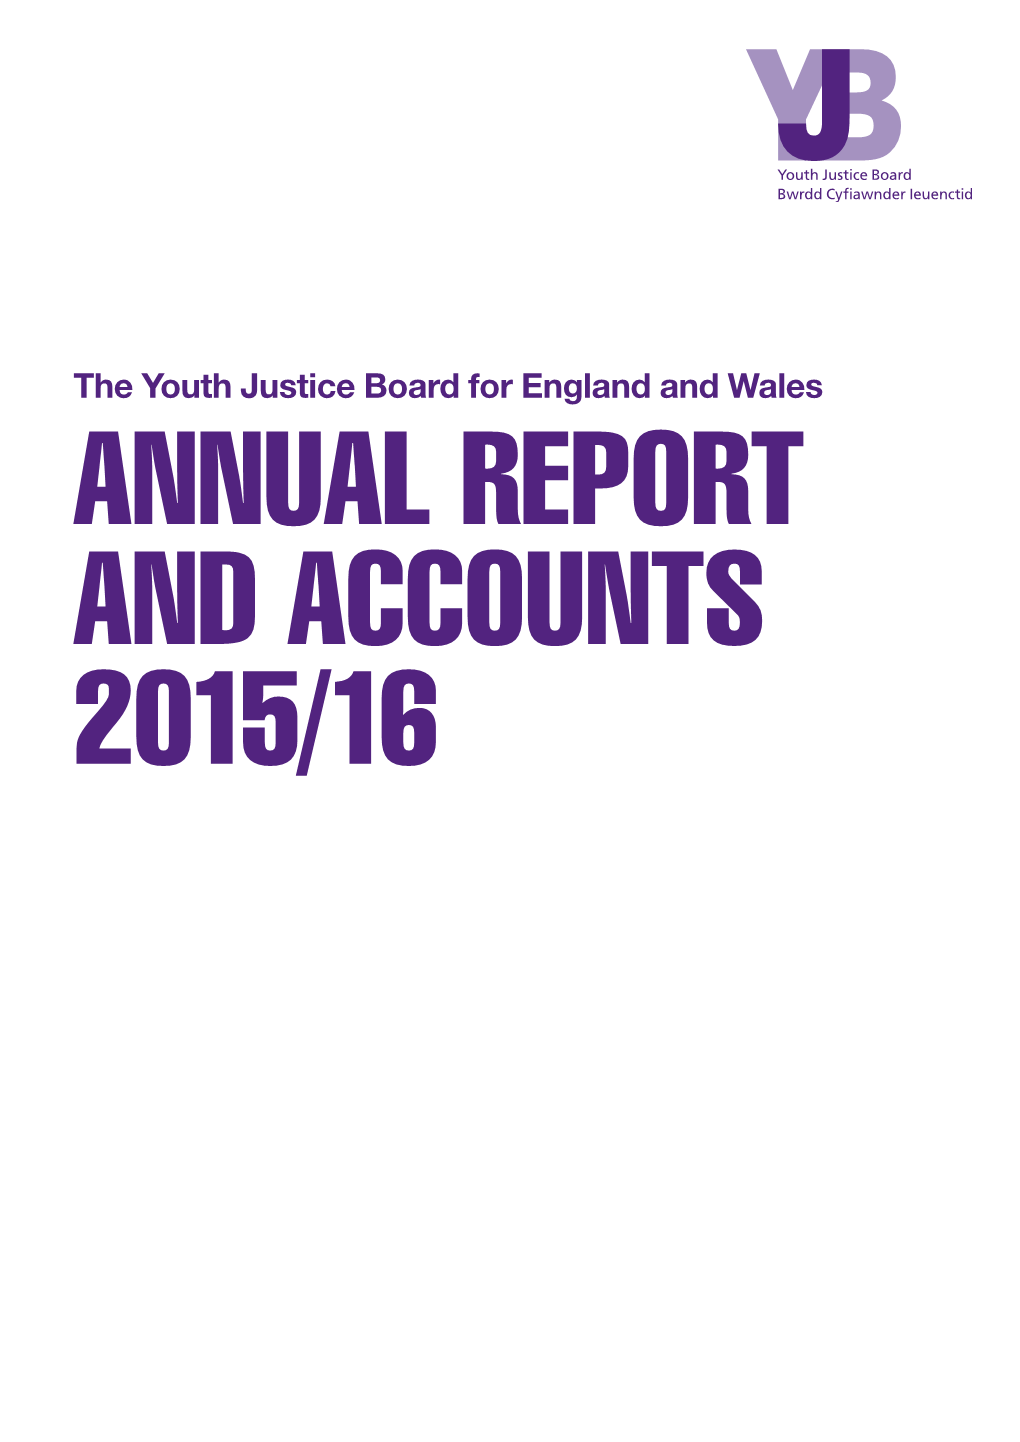 The Youth Justice Board for England and Wales ANNUAL REPORT and ACCOUNTS 2015/16 the Youth Justice Board for England and Wales ANNUAL REPORT and ACCOUNTS 2015/16